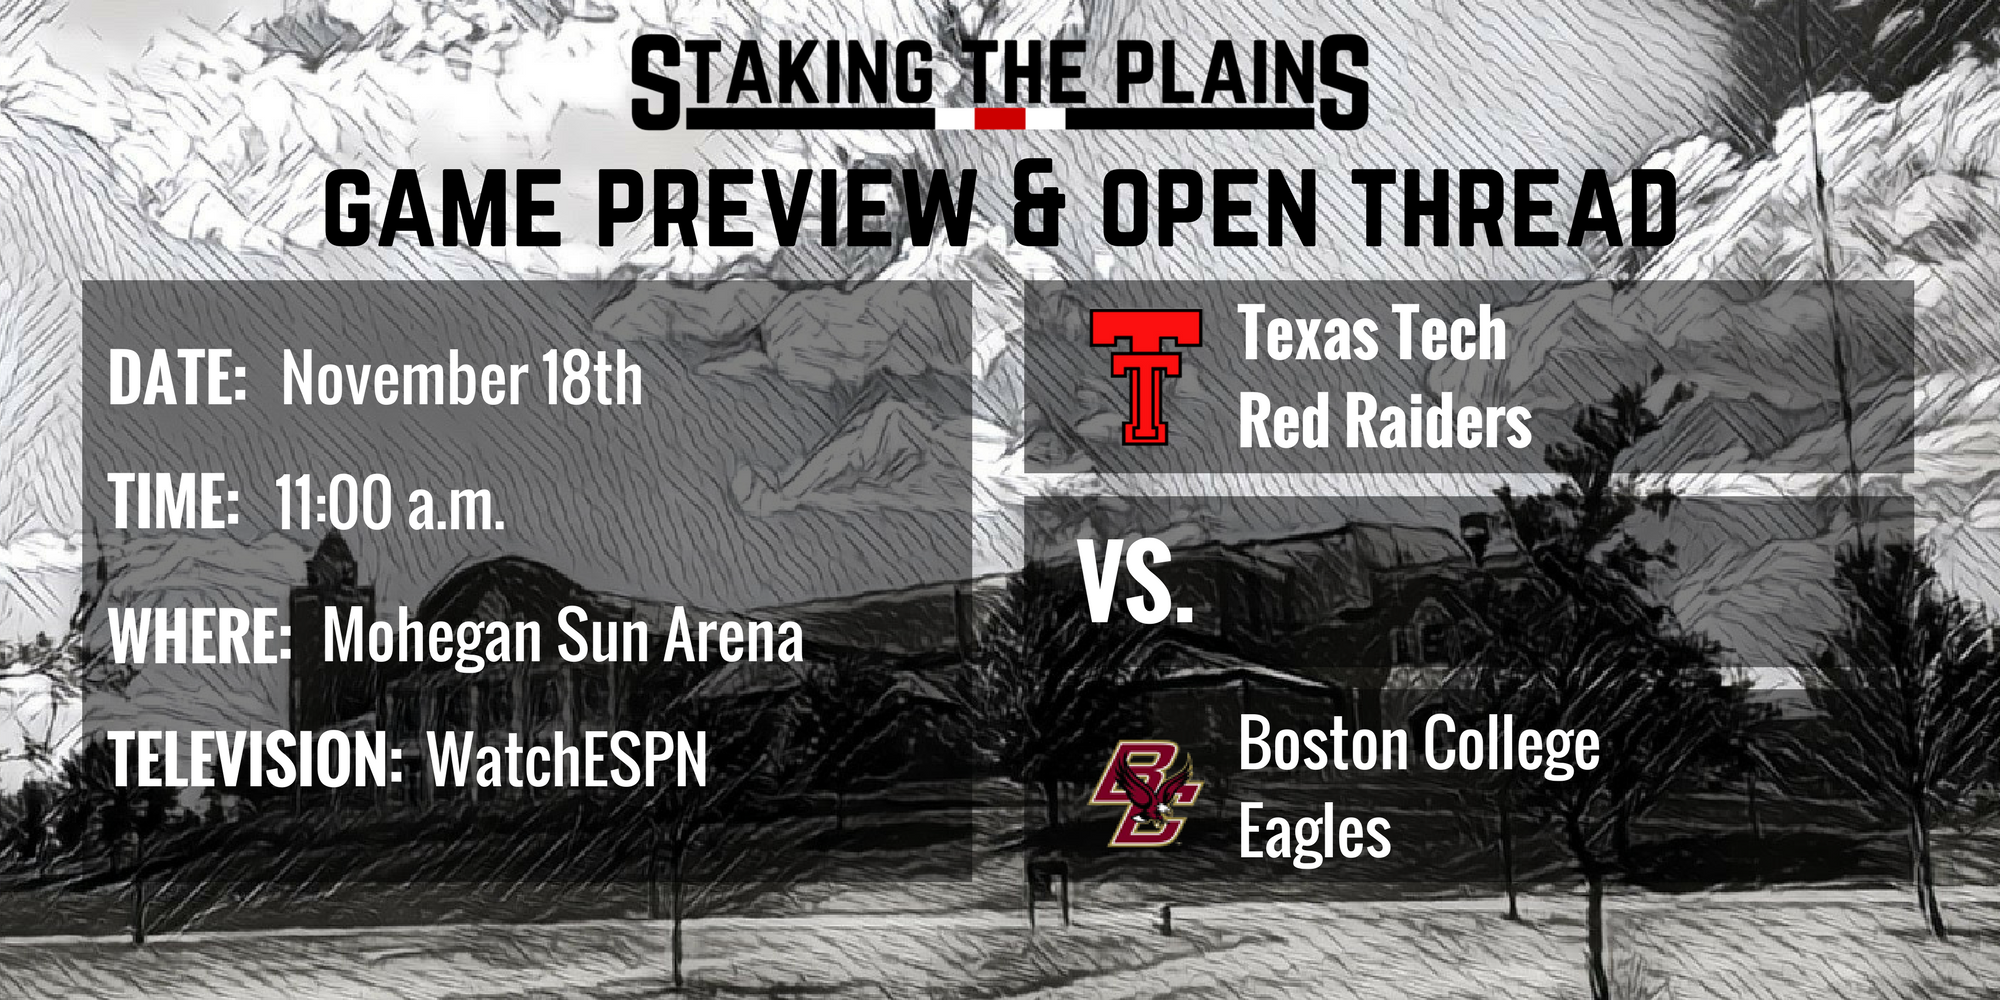 Preview and Game Thread: Texas Tech vs. Boston College